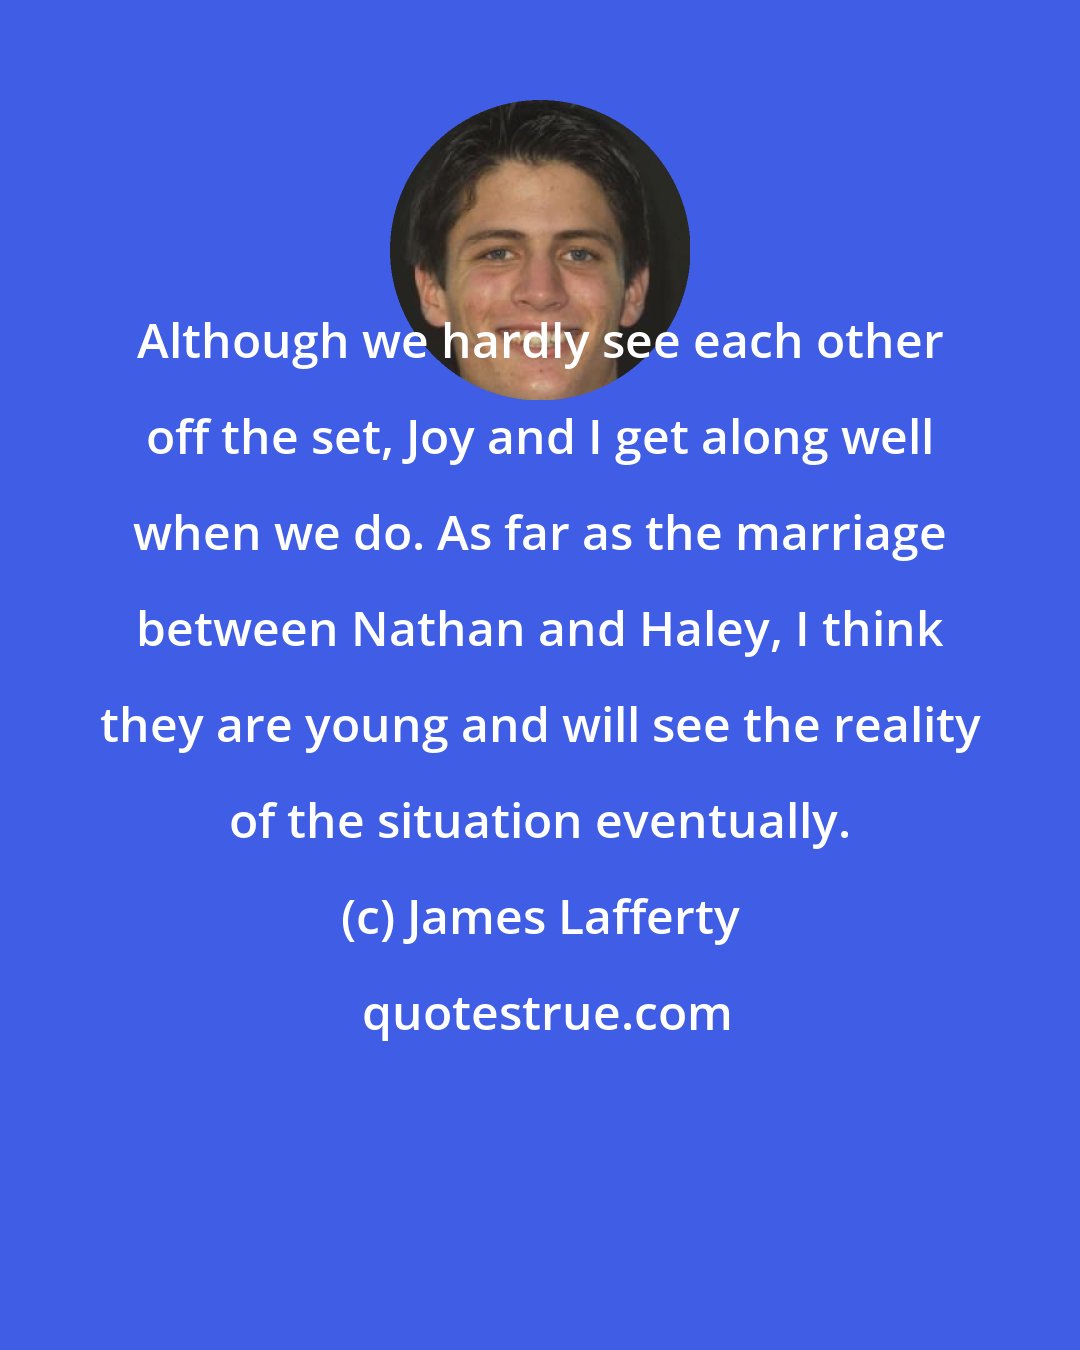 James Lafferty: Although we hardly see each other off the set, Joy and I get along well when we do. As far as the marriage between Nathan and Haley, I think they are young and will see the reality of the situation eventually.